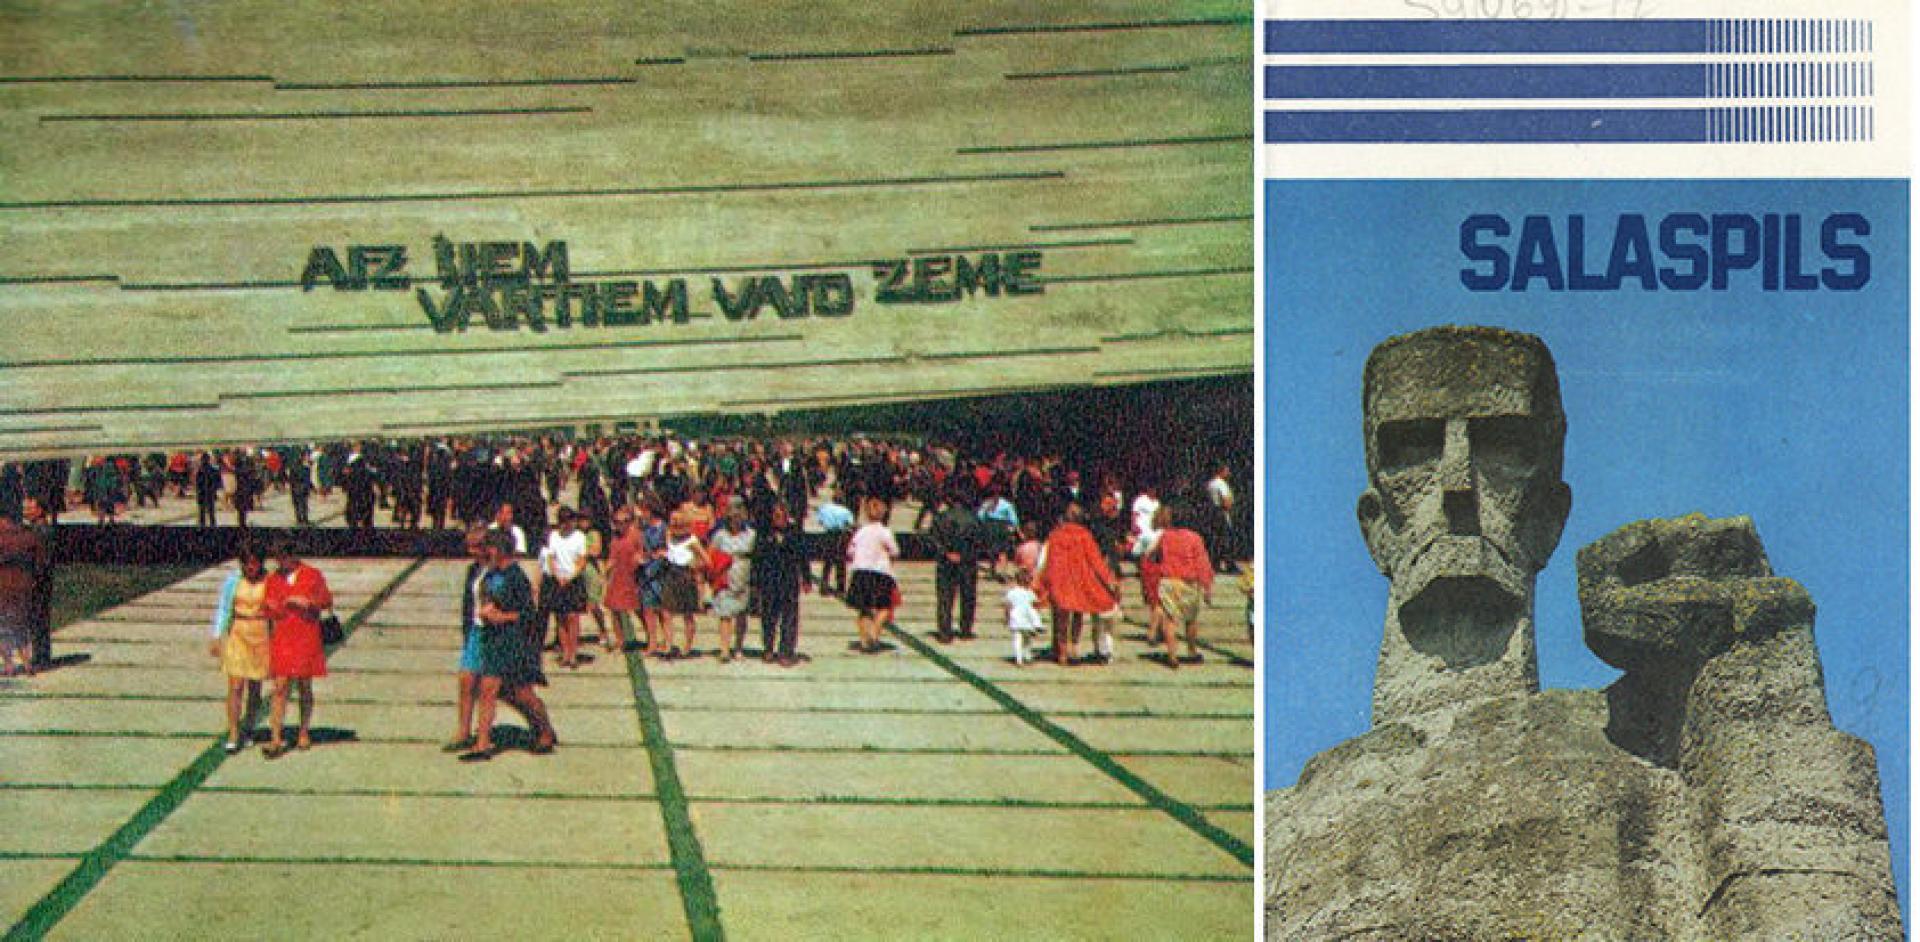 Left: Salaspils in 1975. Right: Cover of the 1985 Salaspils brochure.